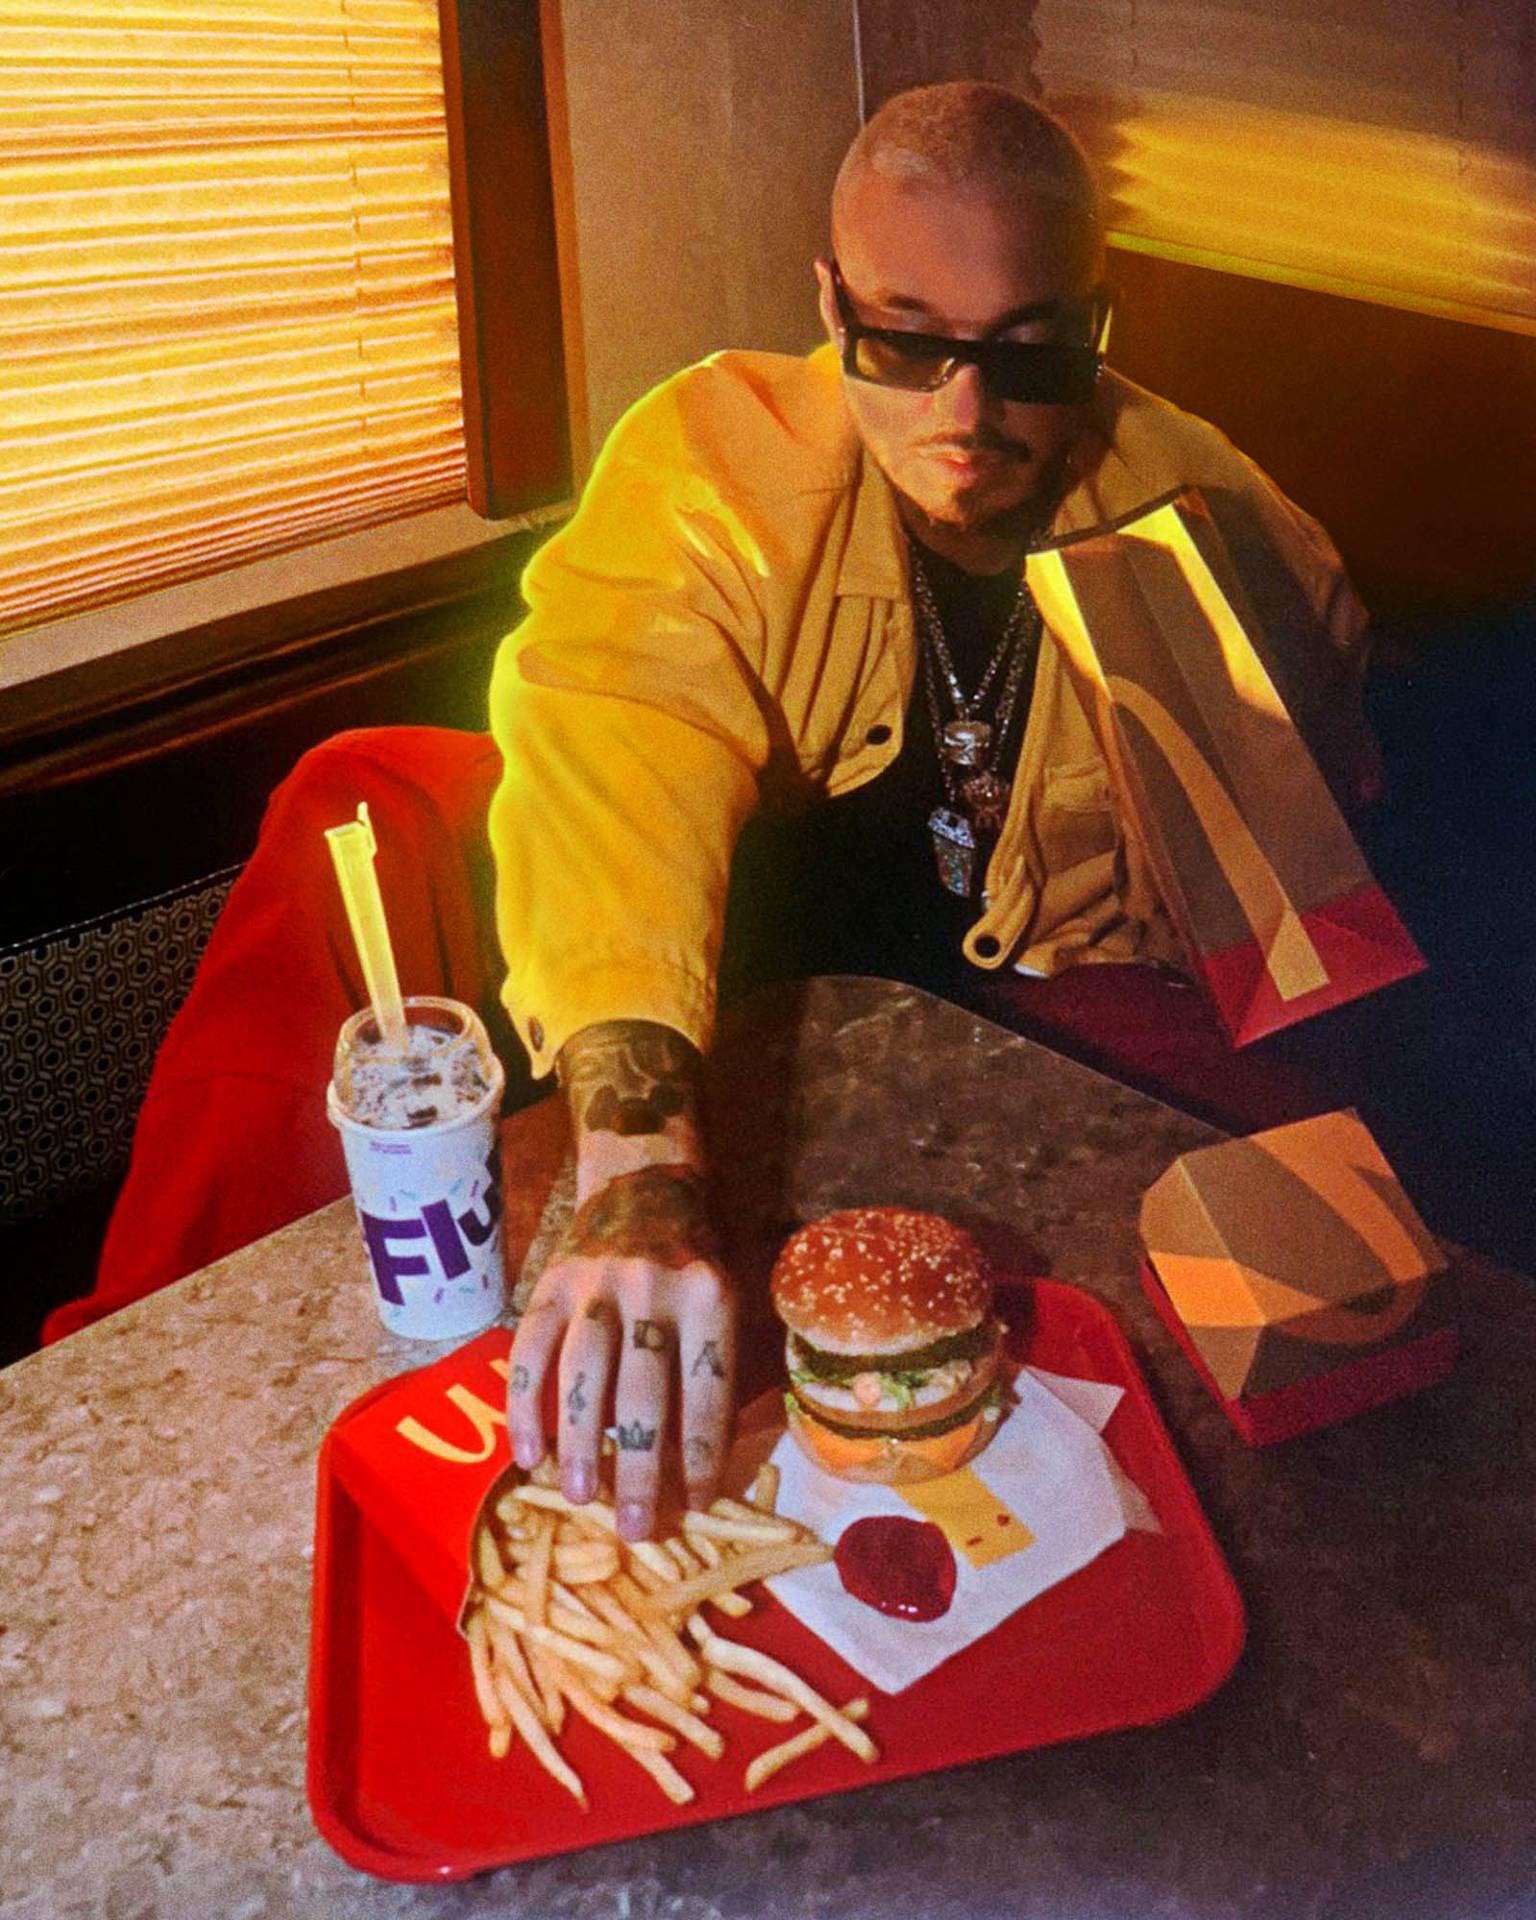 J Balvin Eating Burger And Fries Background